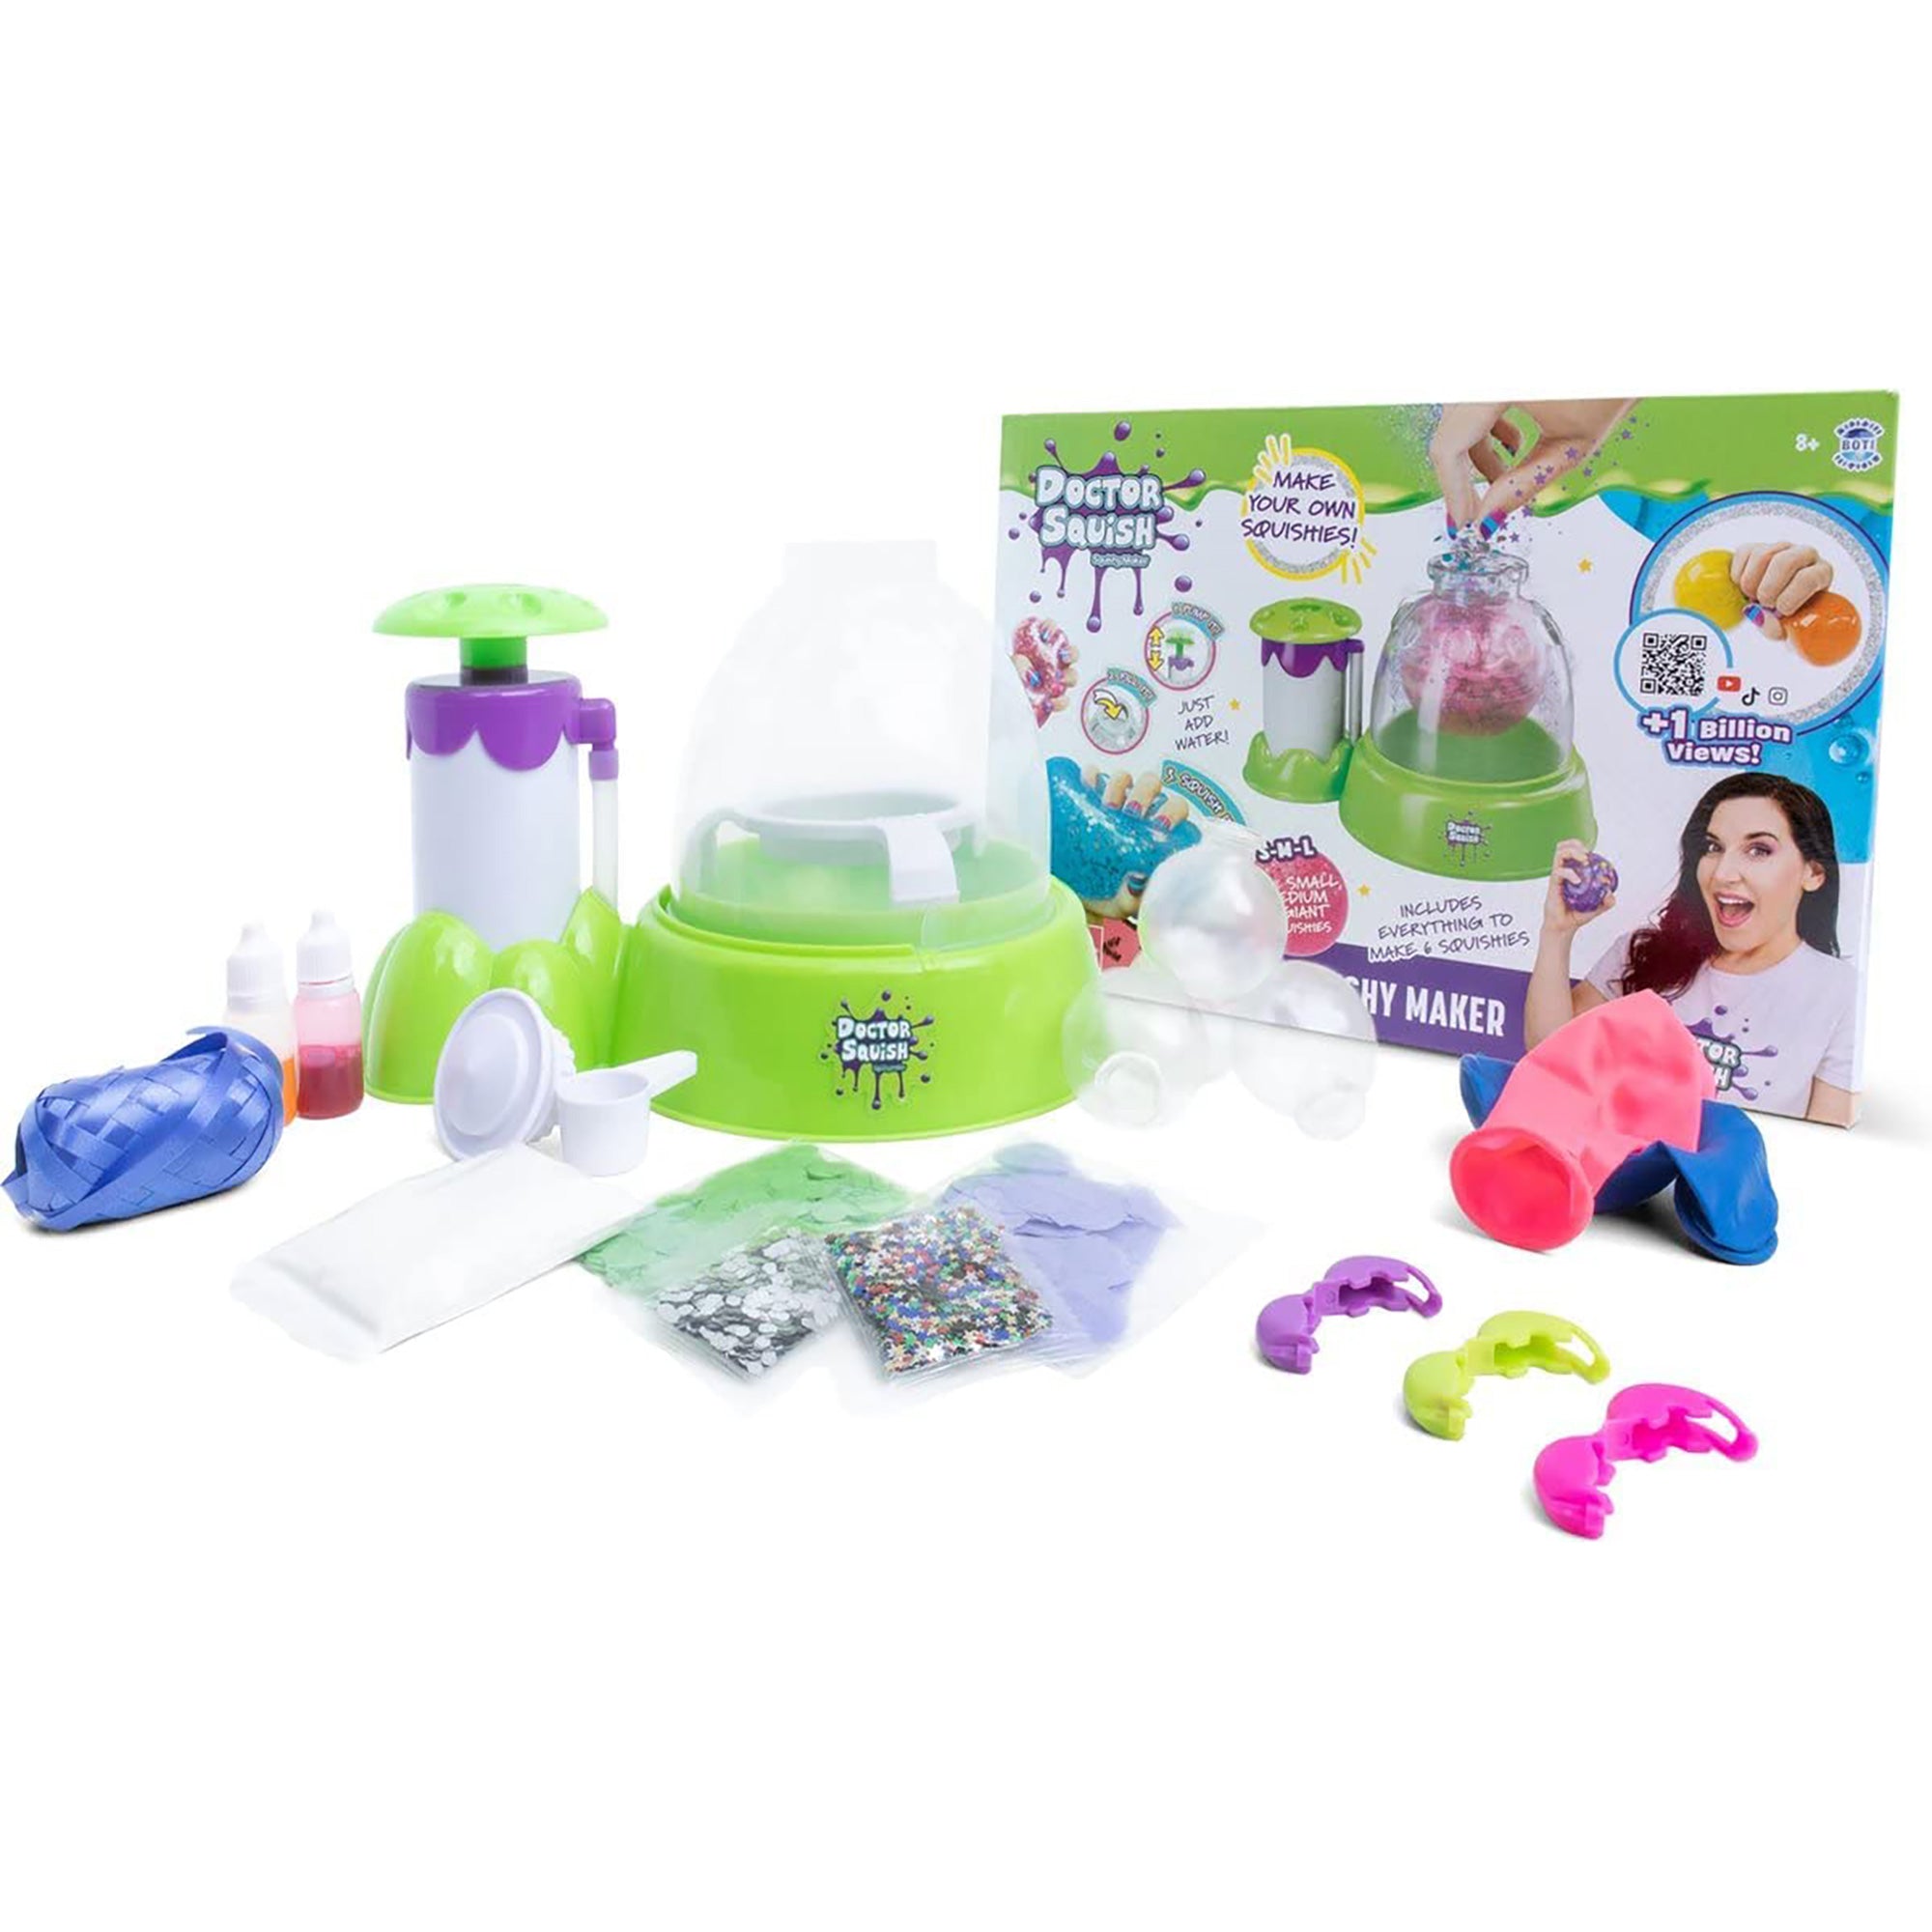 Dr Squish - Squishy Maker, Online Squishies Store